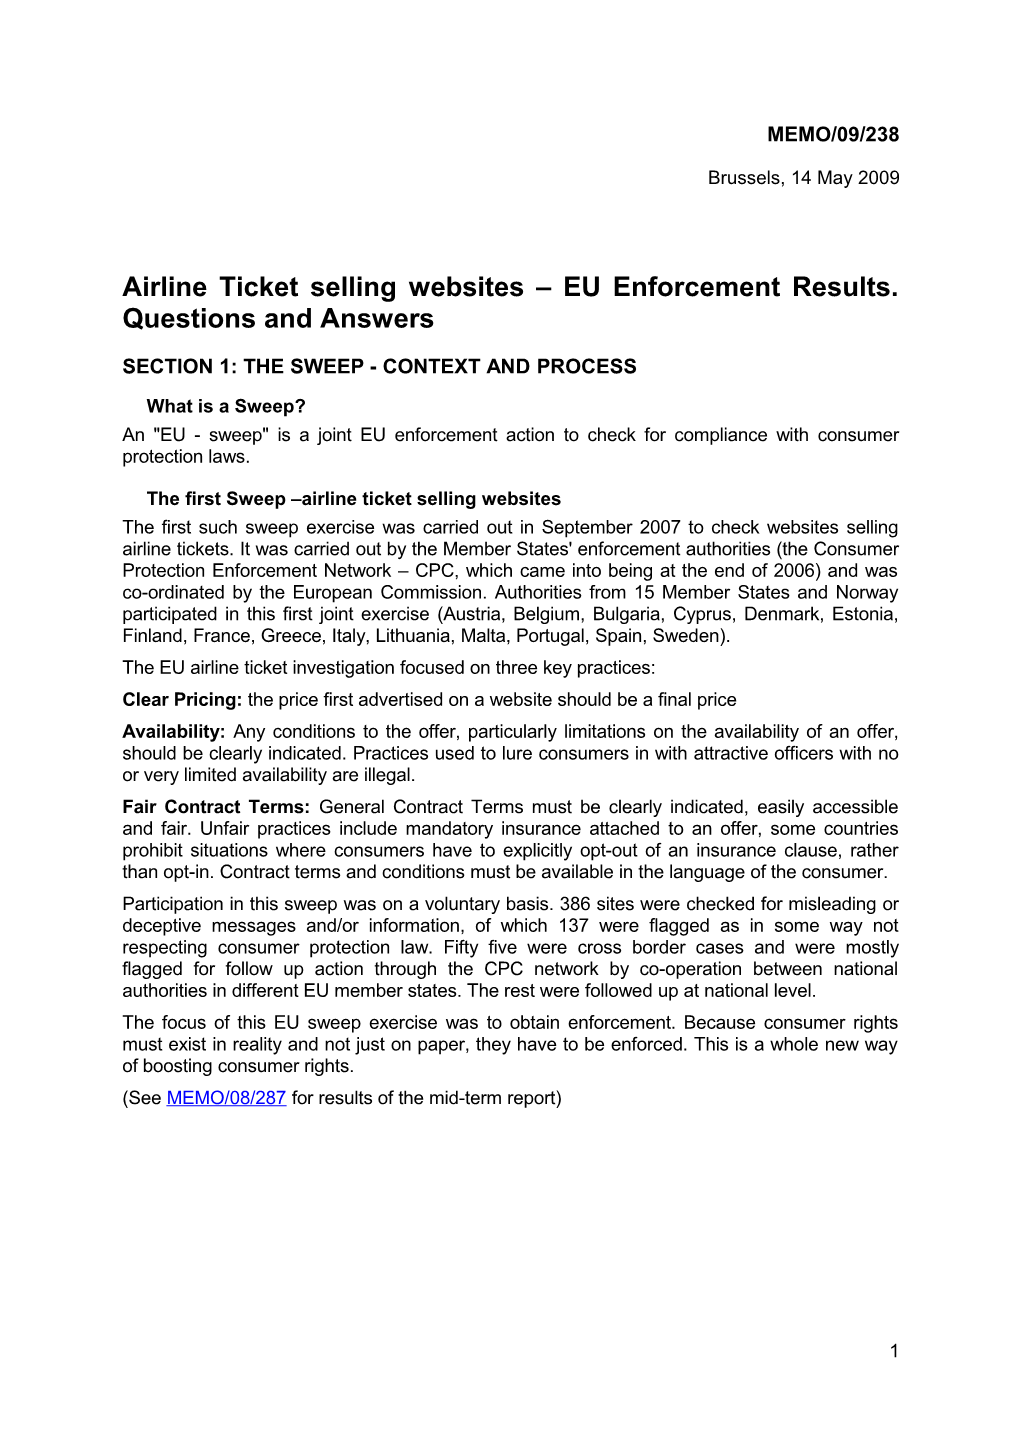 Airline Ticket Selling Websites EU Enforcement Results. Questions and Answers